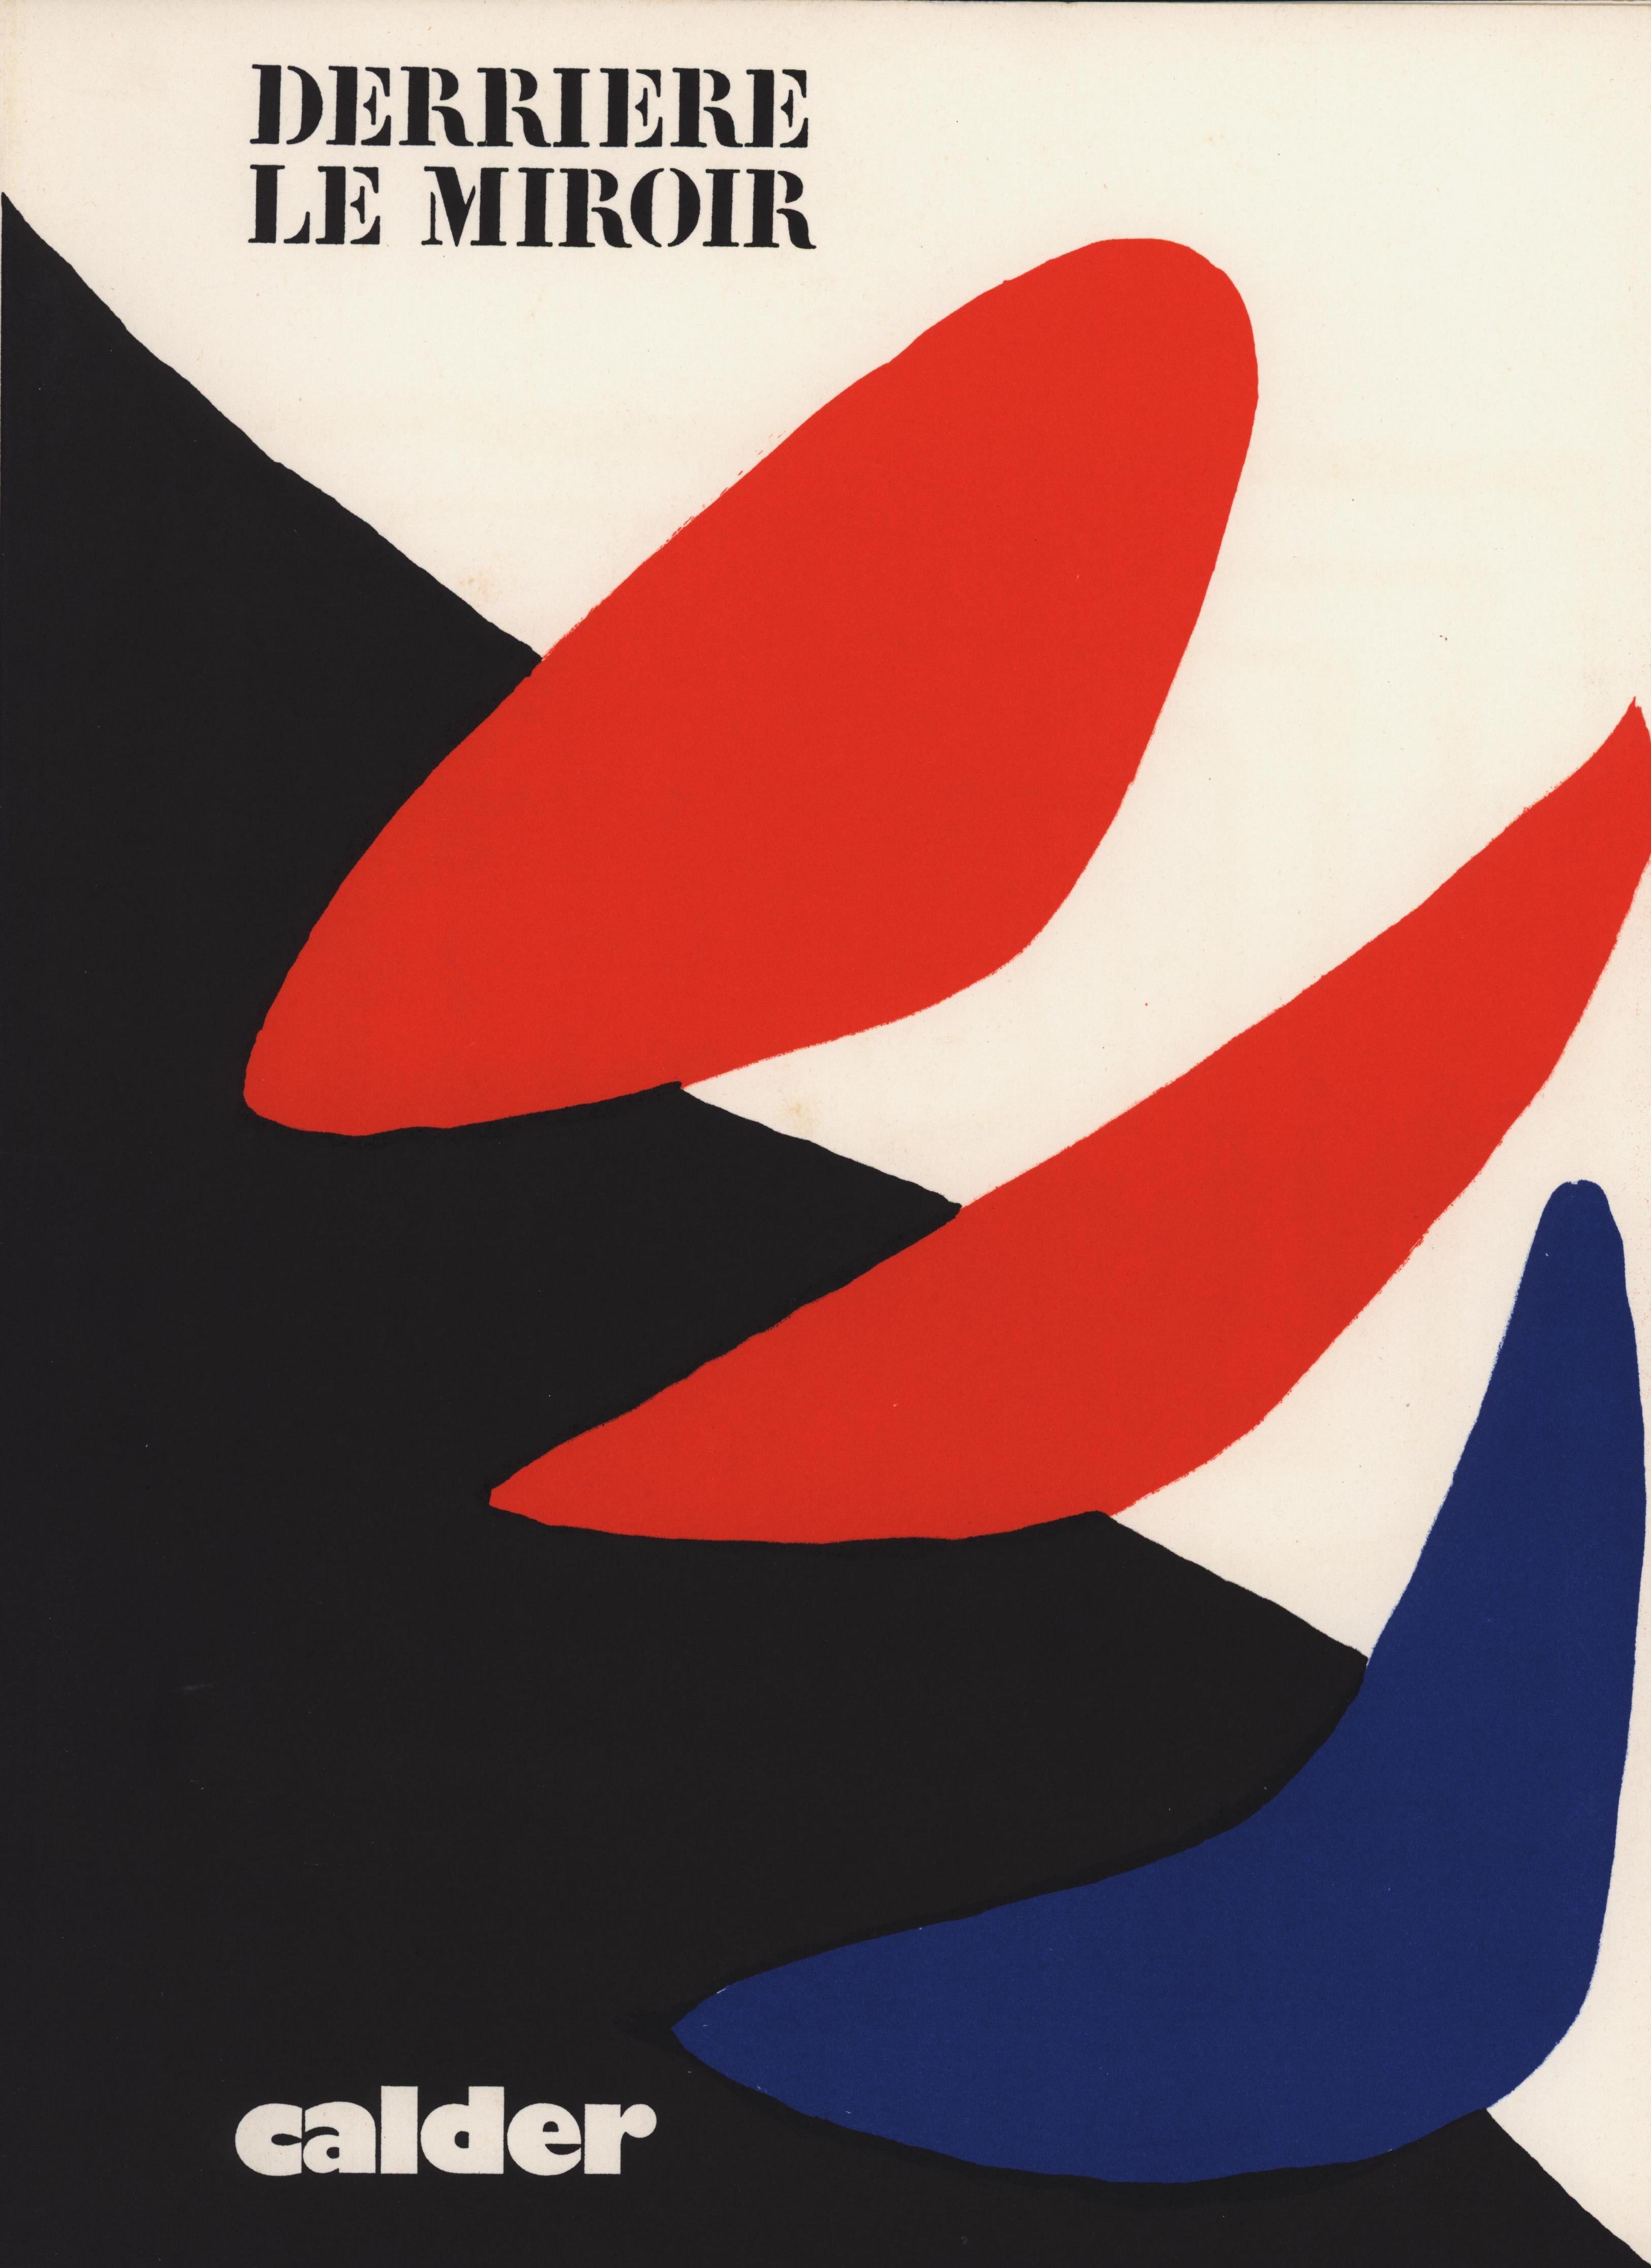 Alexander Calder Lithographic cover c. 1971 from Derrière le miroir:

Lithographic cover in colors; 11 x 15 inches.
Very good overall vintage condition.
Unsigned from an edition of unknown with crisp bright colors.
Printed in France circa early